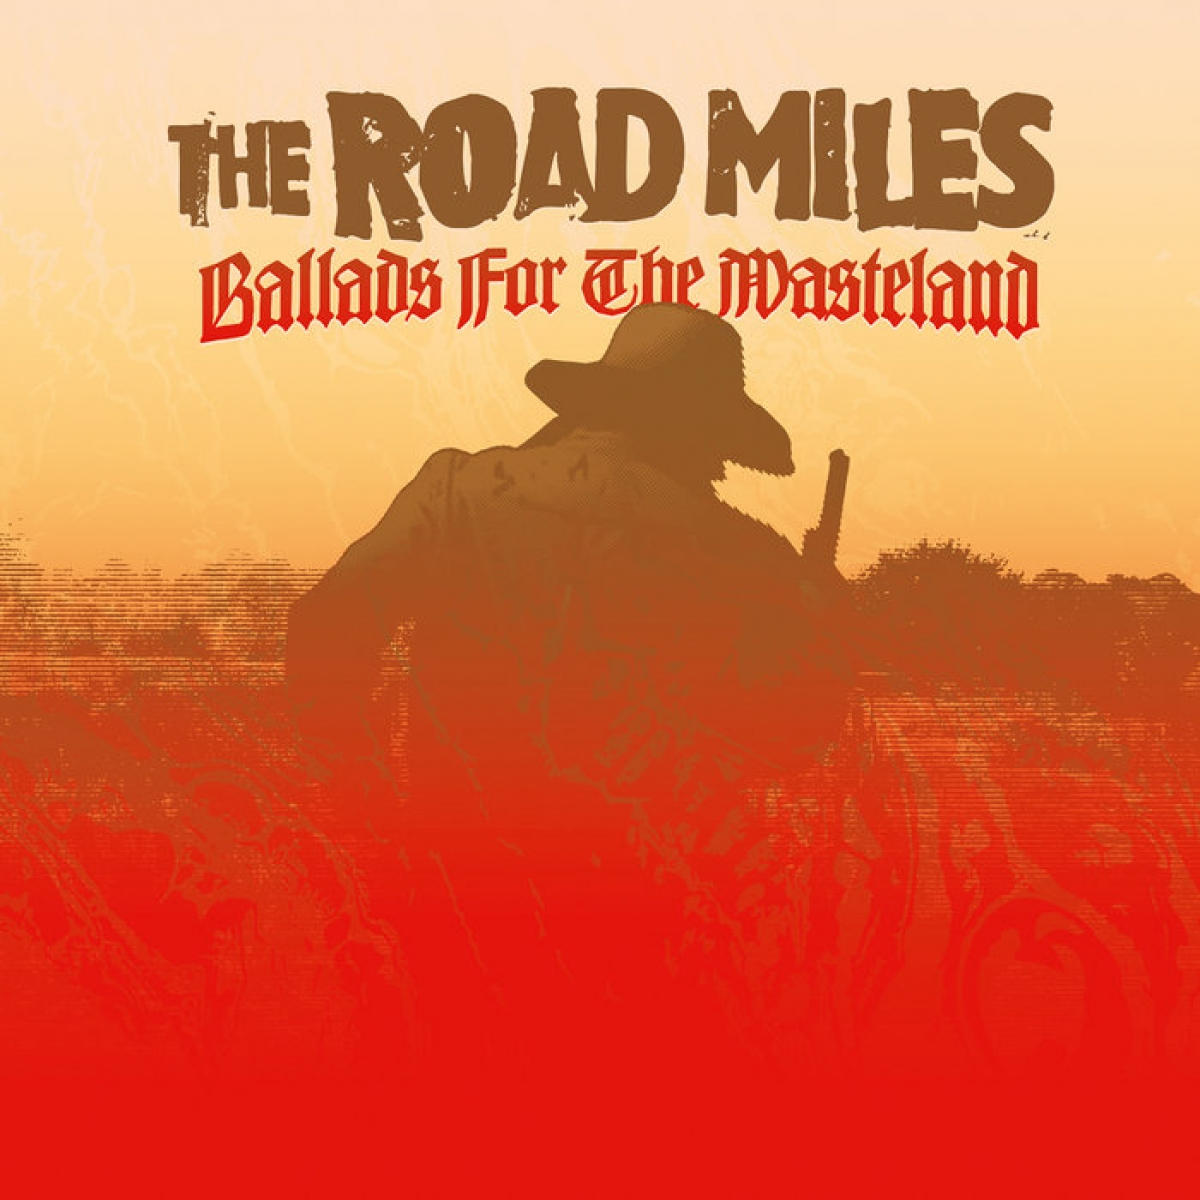 The Road Miles - Ballads For The Wasteland (Archaeopia, 2017)